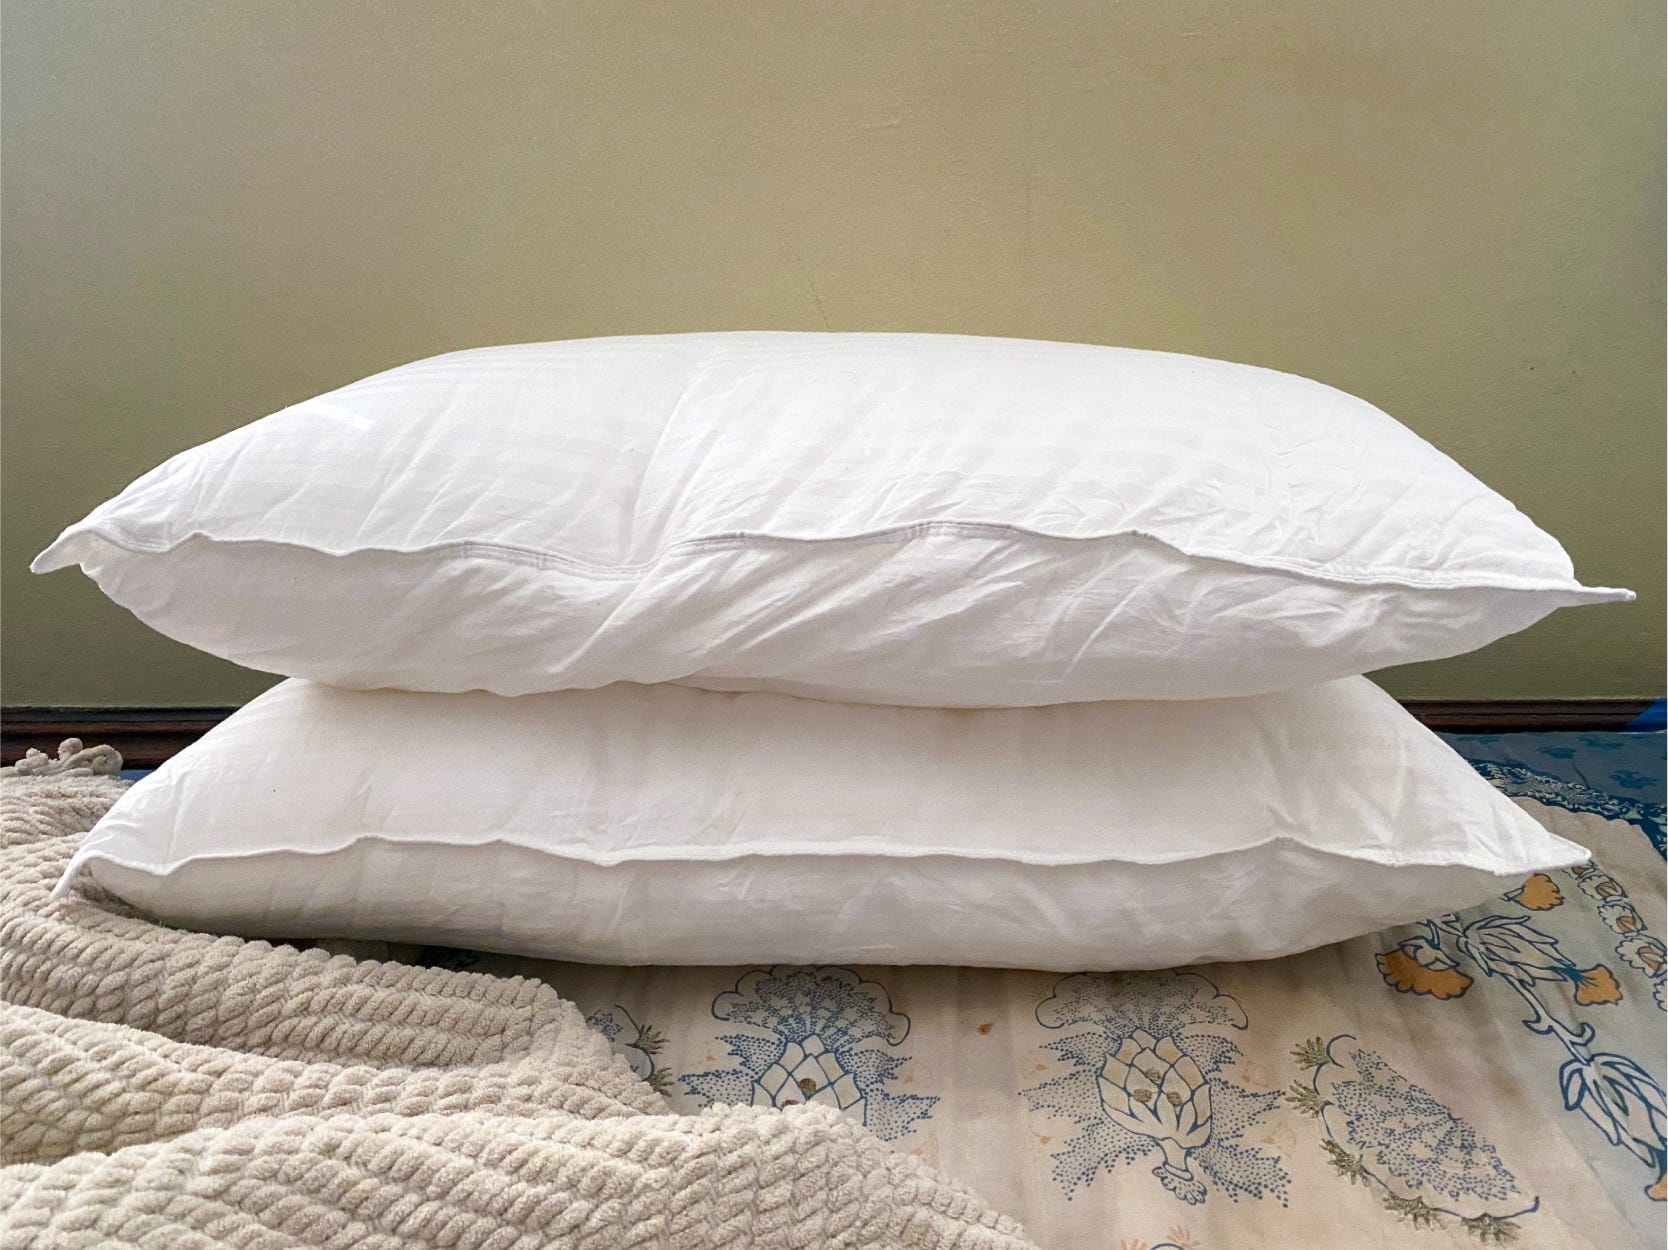 Two white Beckham Hotel pillows sit flat on top of each other on a bed.